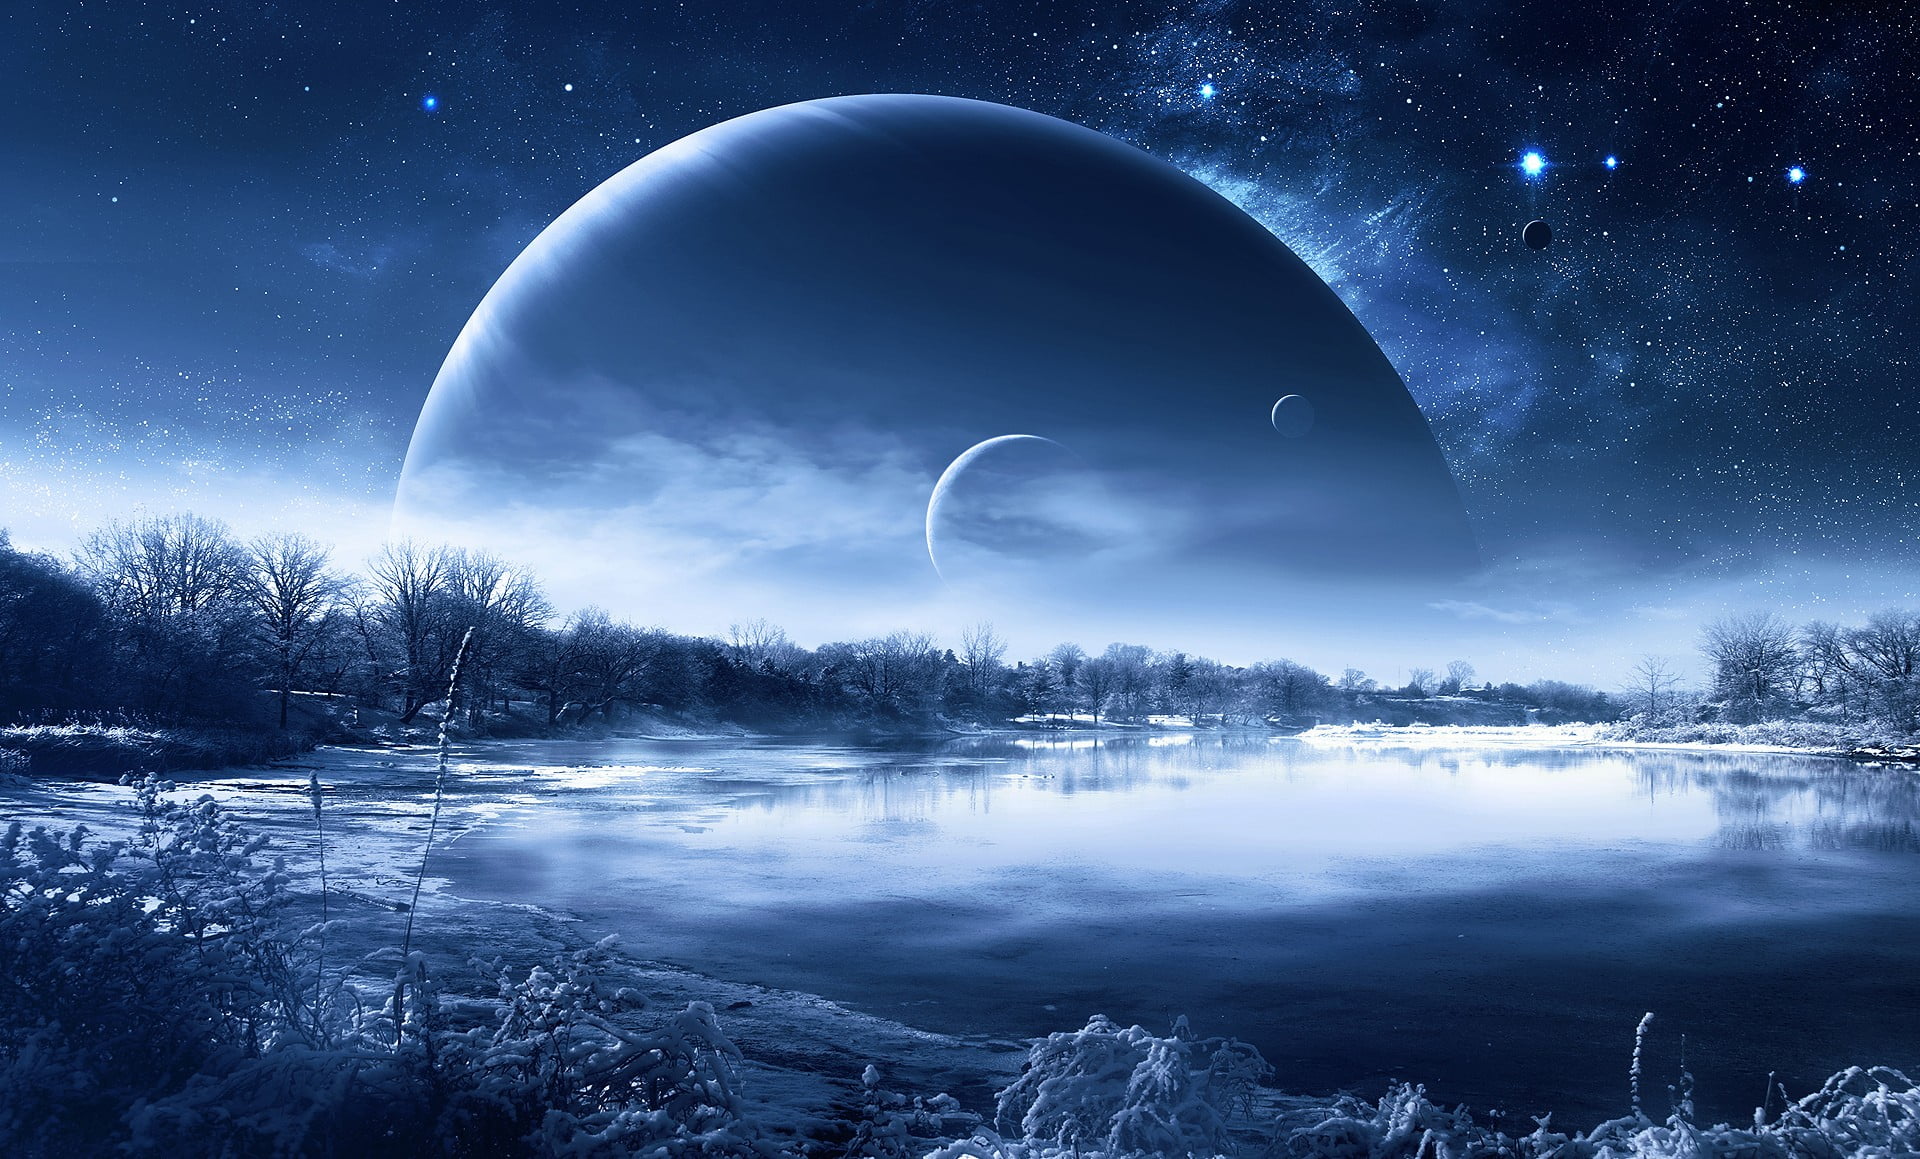 painting of blue moon and planet, stars, galaxy, snow, space art